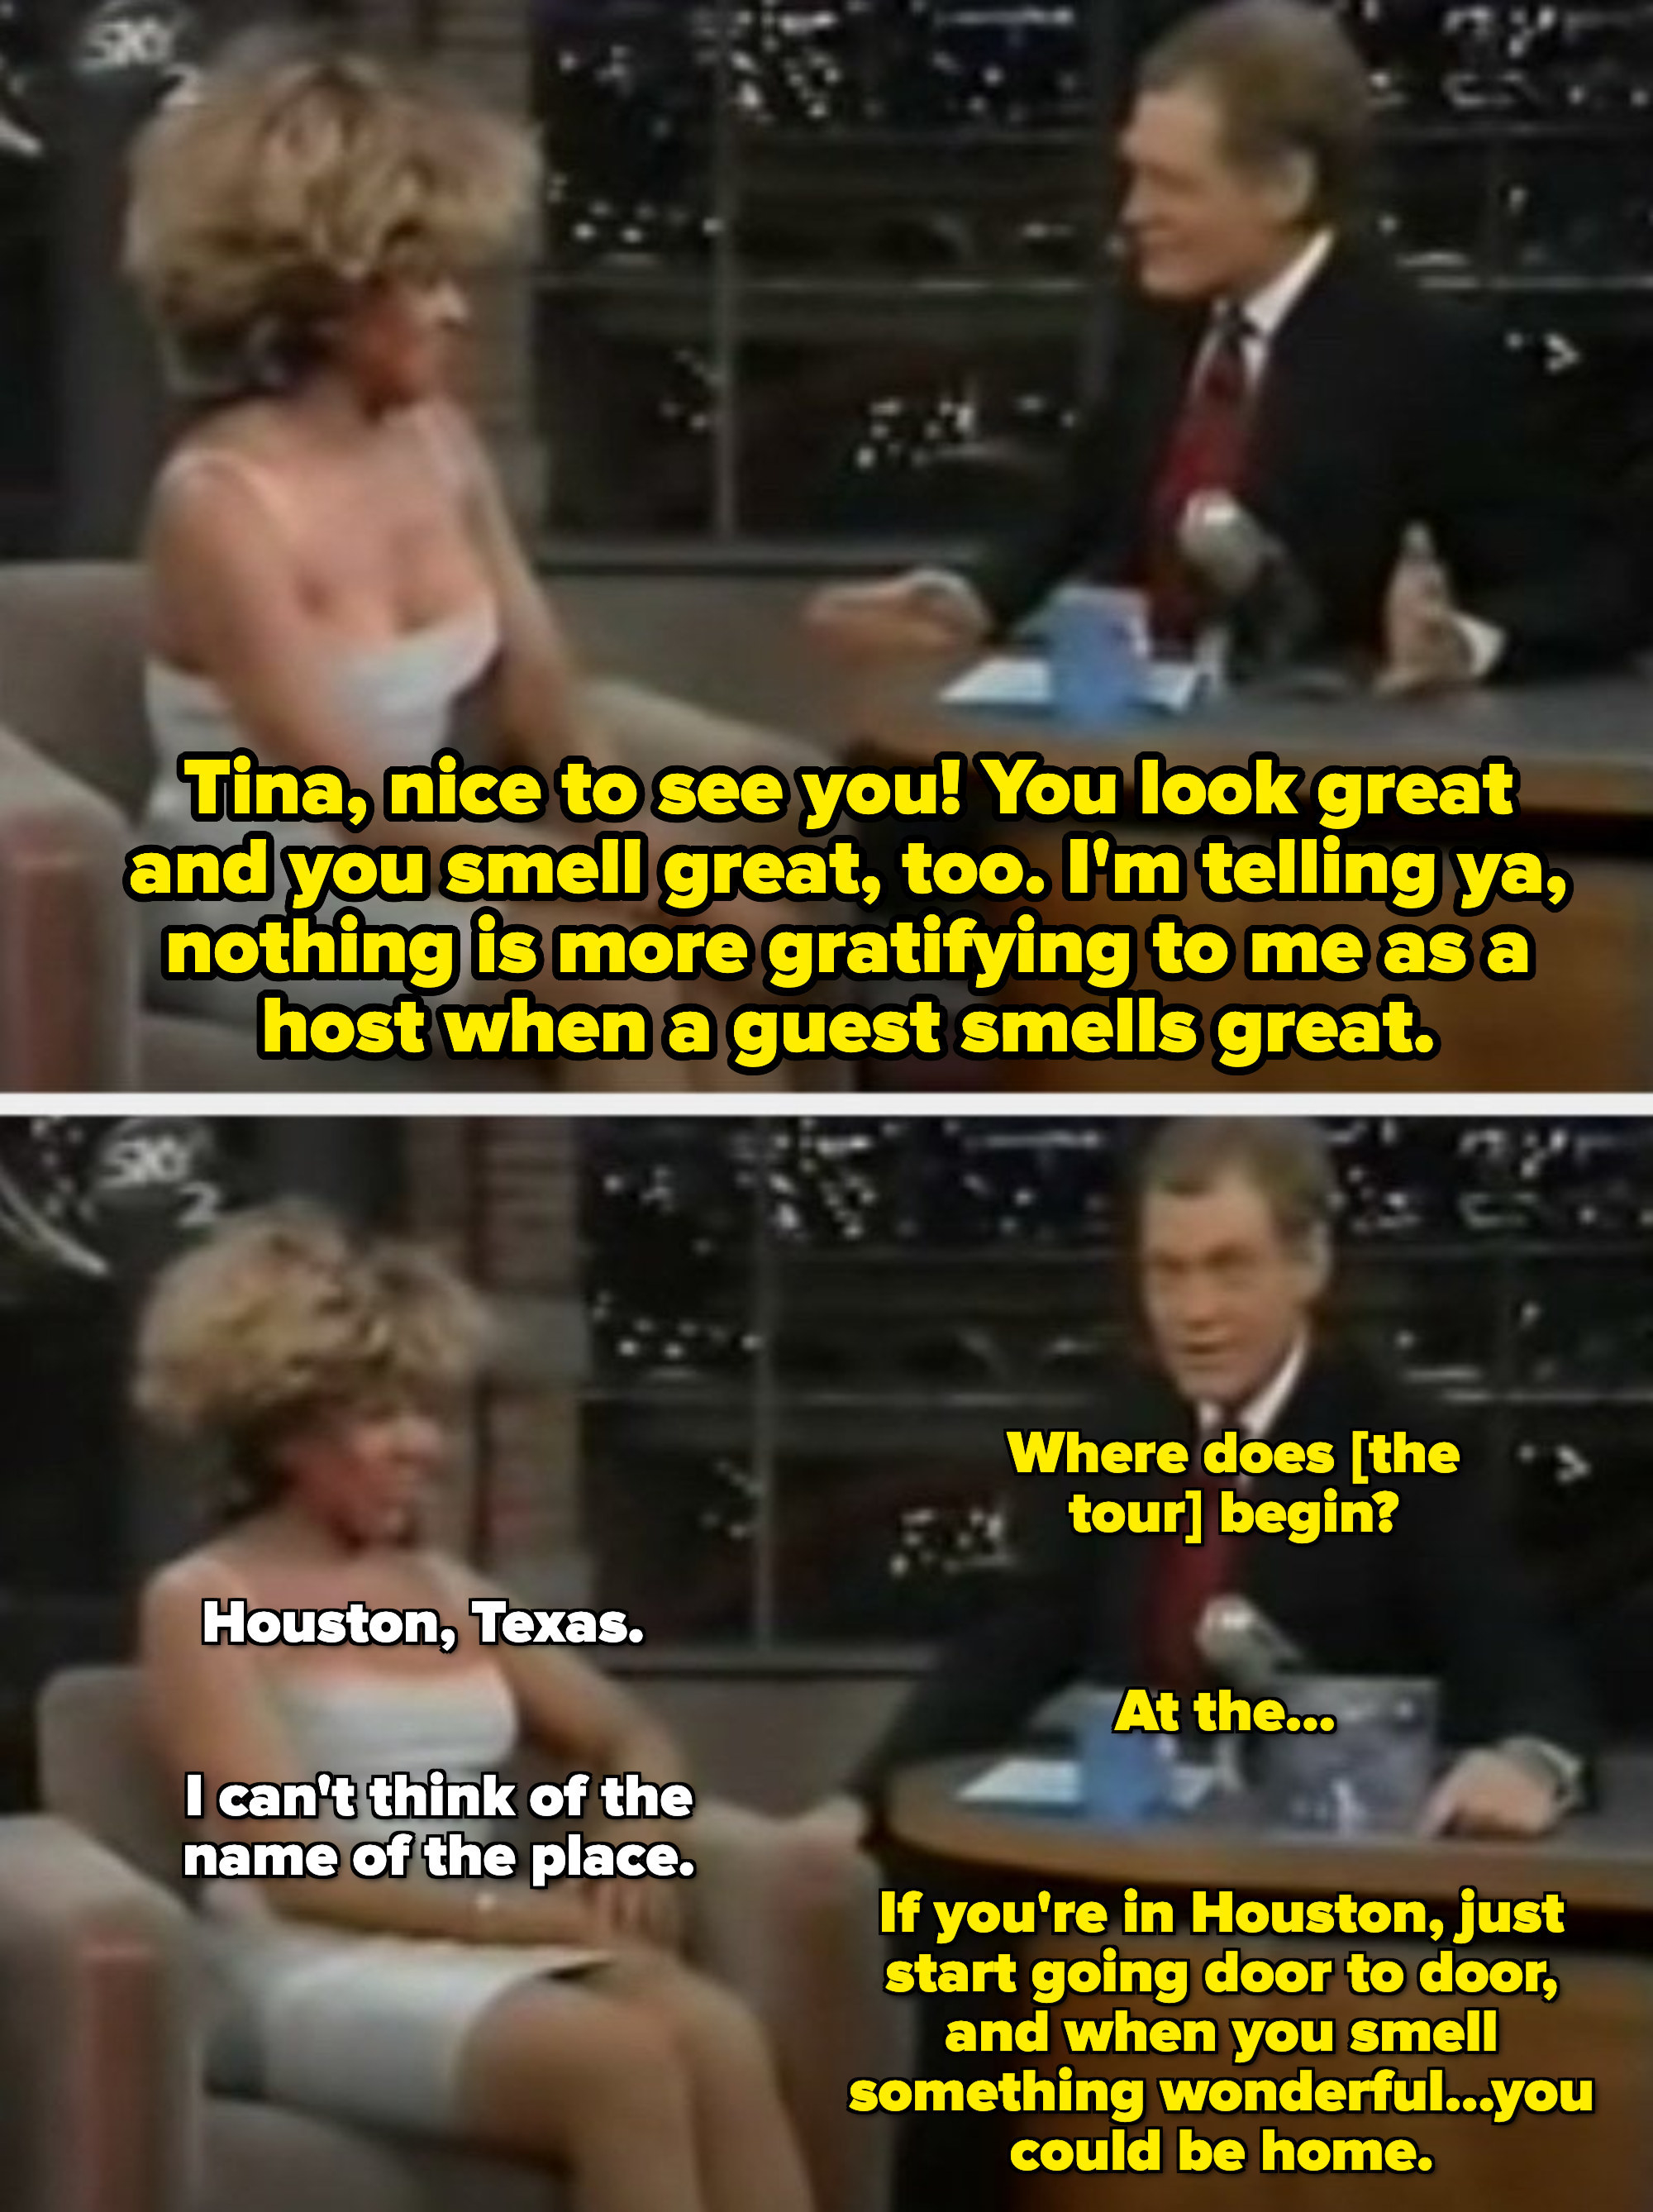 Letterman commenting on Turner&#x27;s scent, telling the audience: &quot;If you&#x27;re in Houston, just start going door to door, and when you smell something wonderful...you could be home&quot;